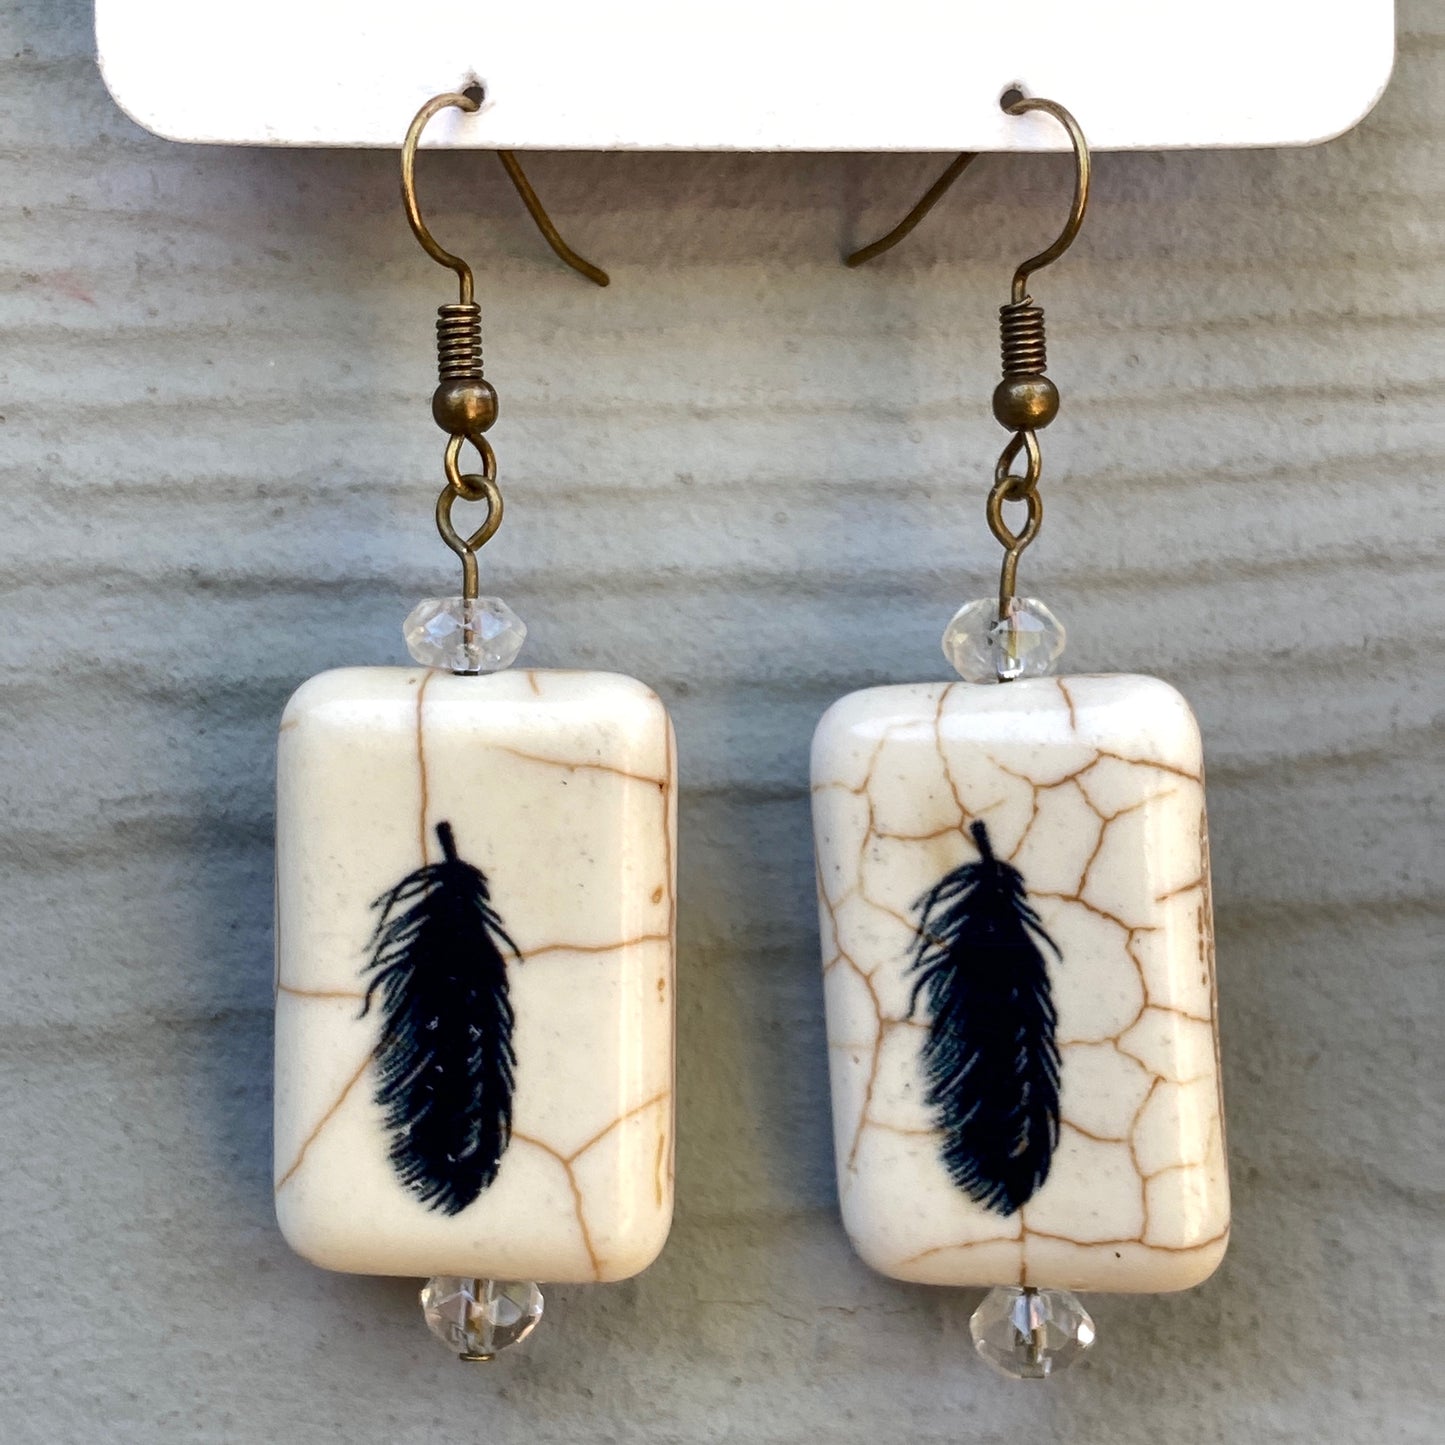 Painted Feather earrings with citrine gemstones.